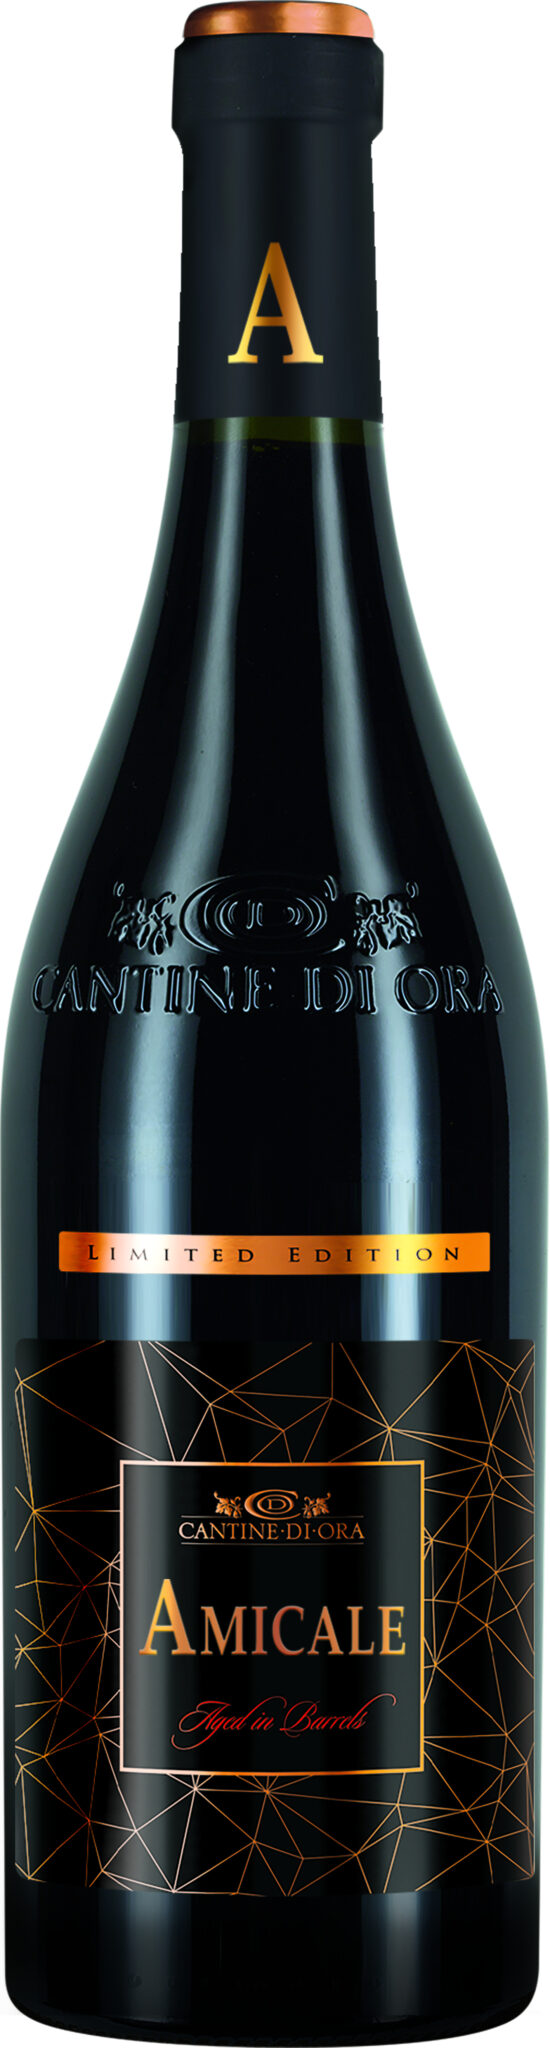 Amicale Limited Edition, Corvina Rosso Veneto IGT